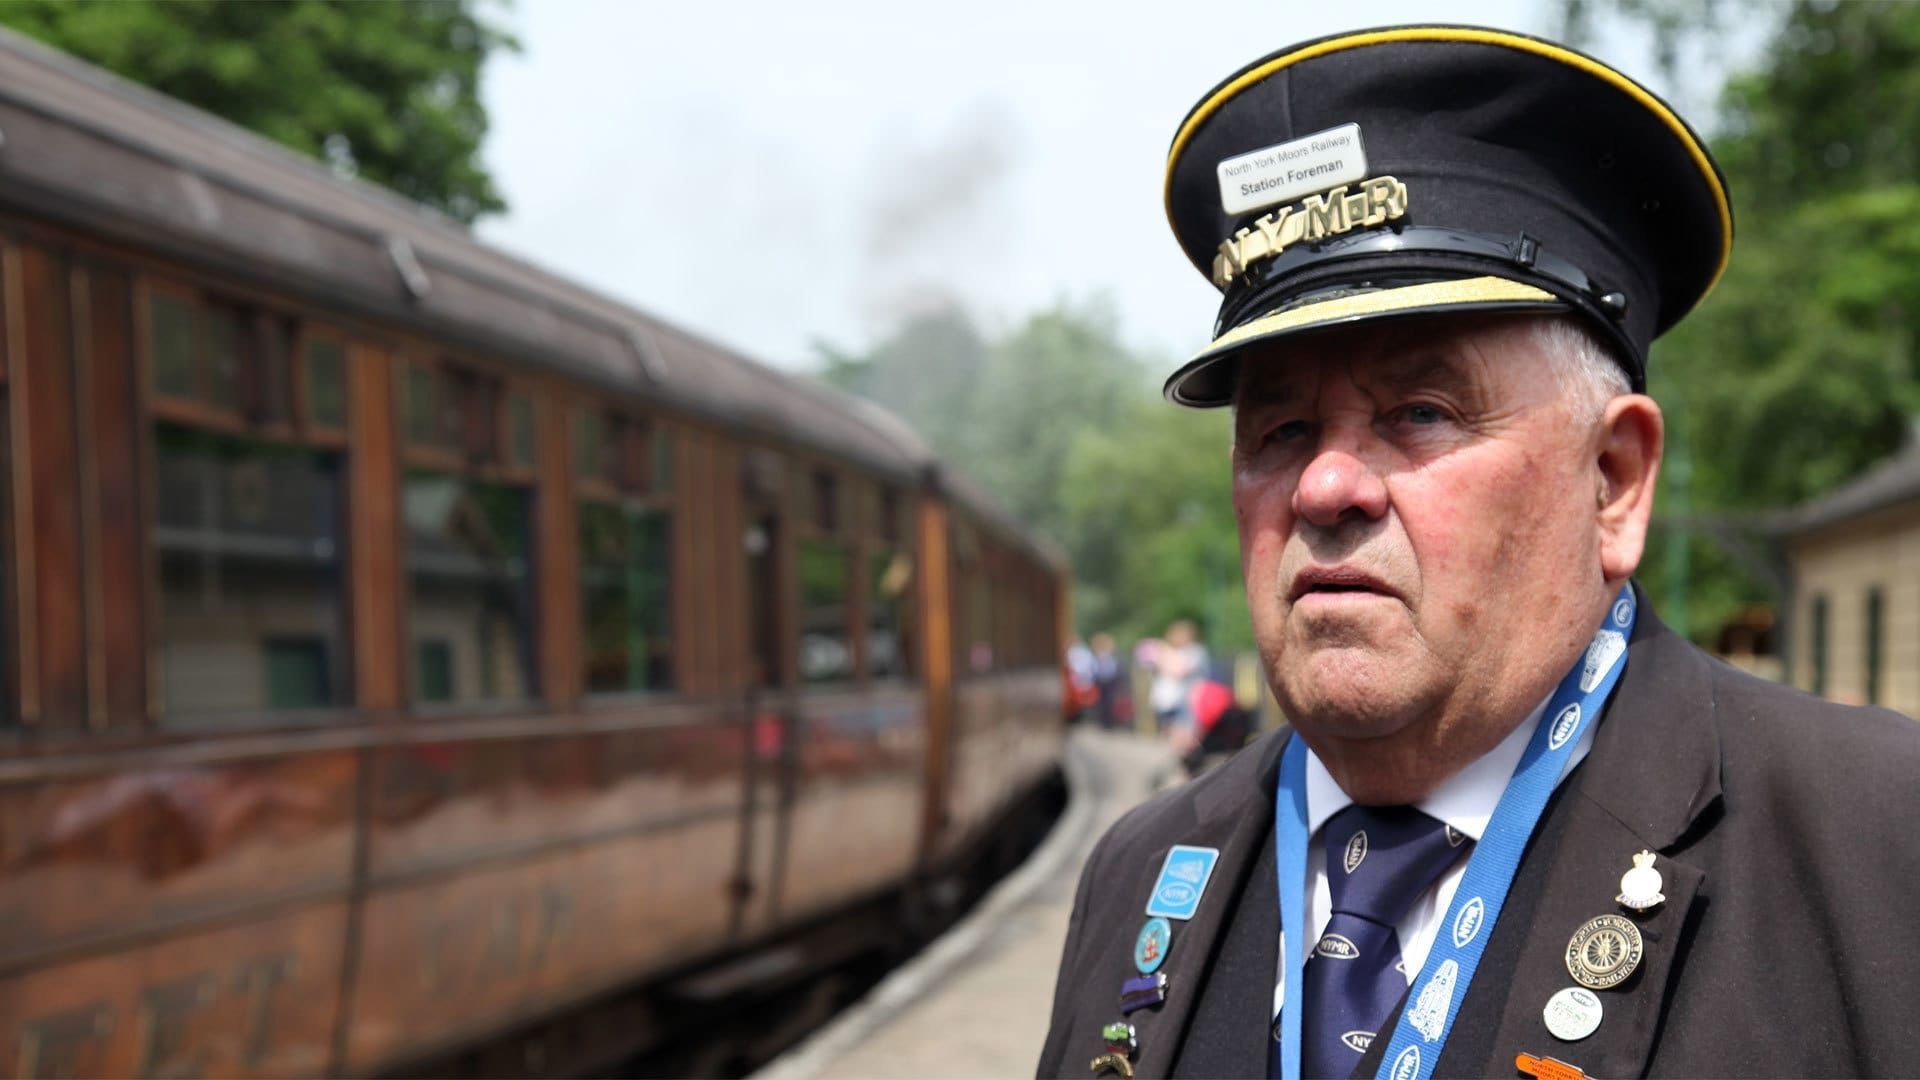 The Yorkshire Steam Railway: All Aboard background